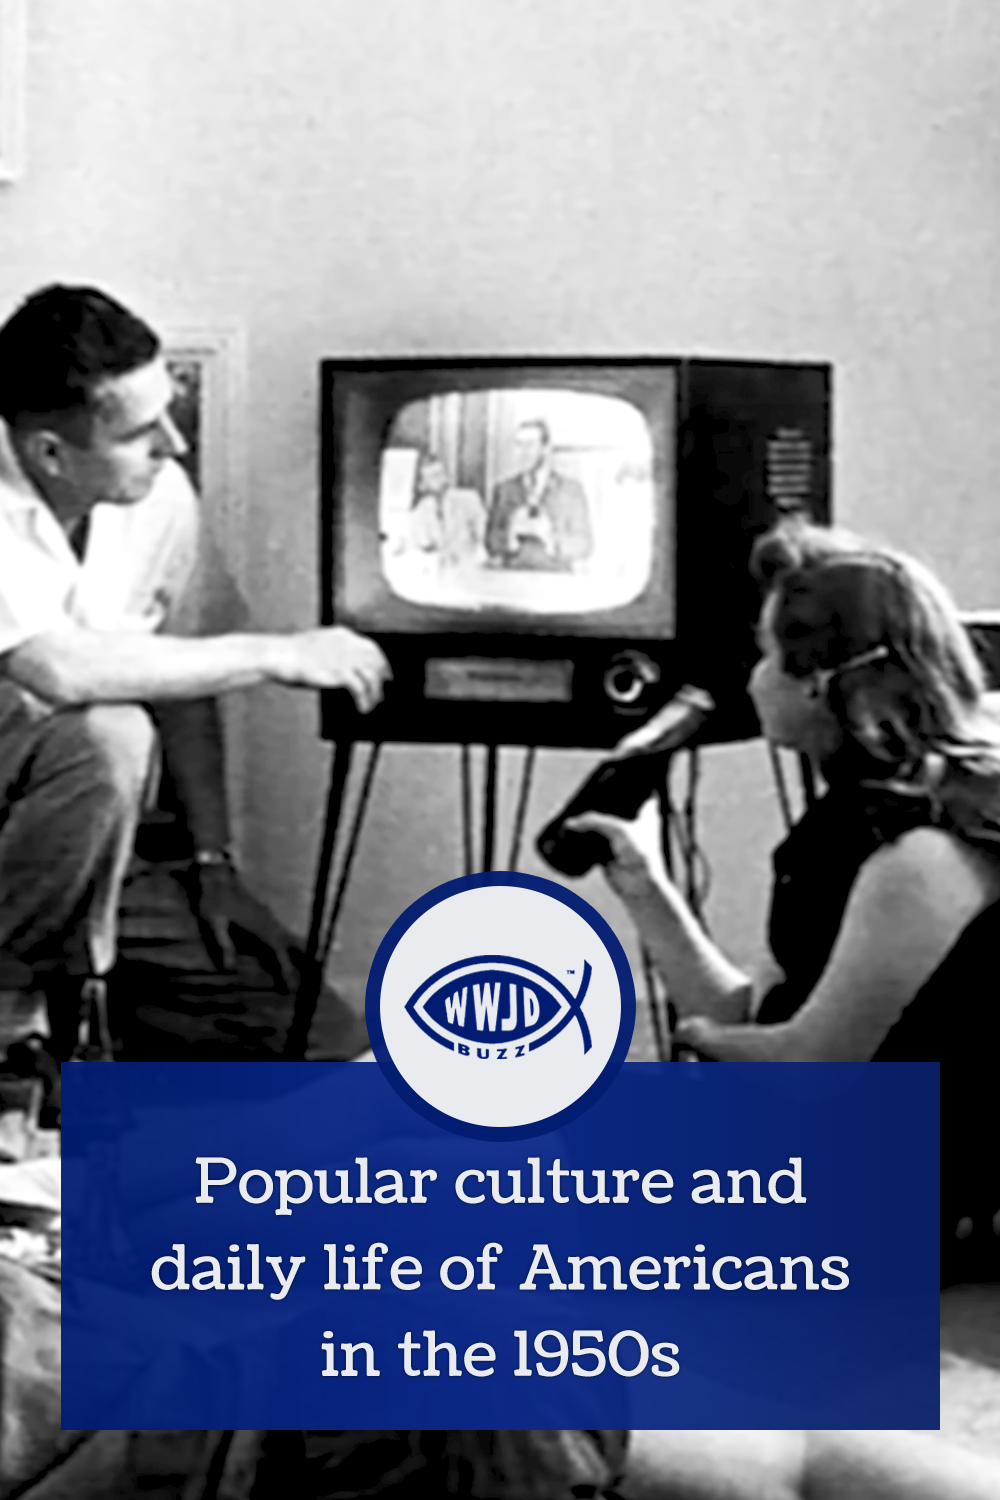 Popular culture and daily life of Americans in the 1950s